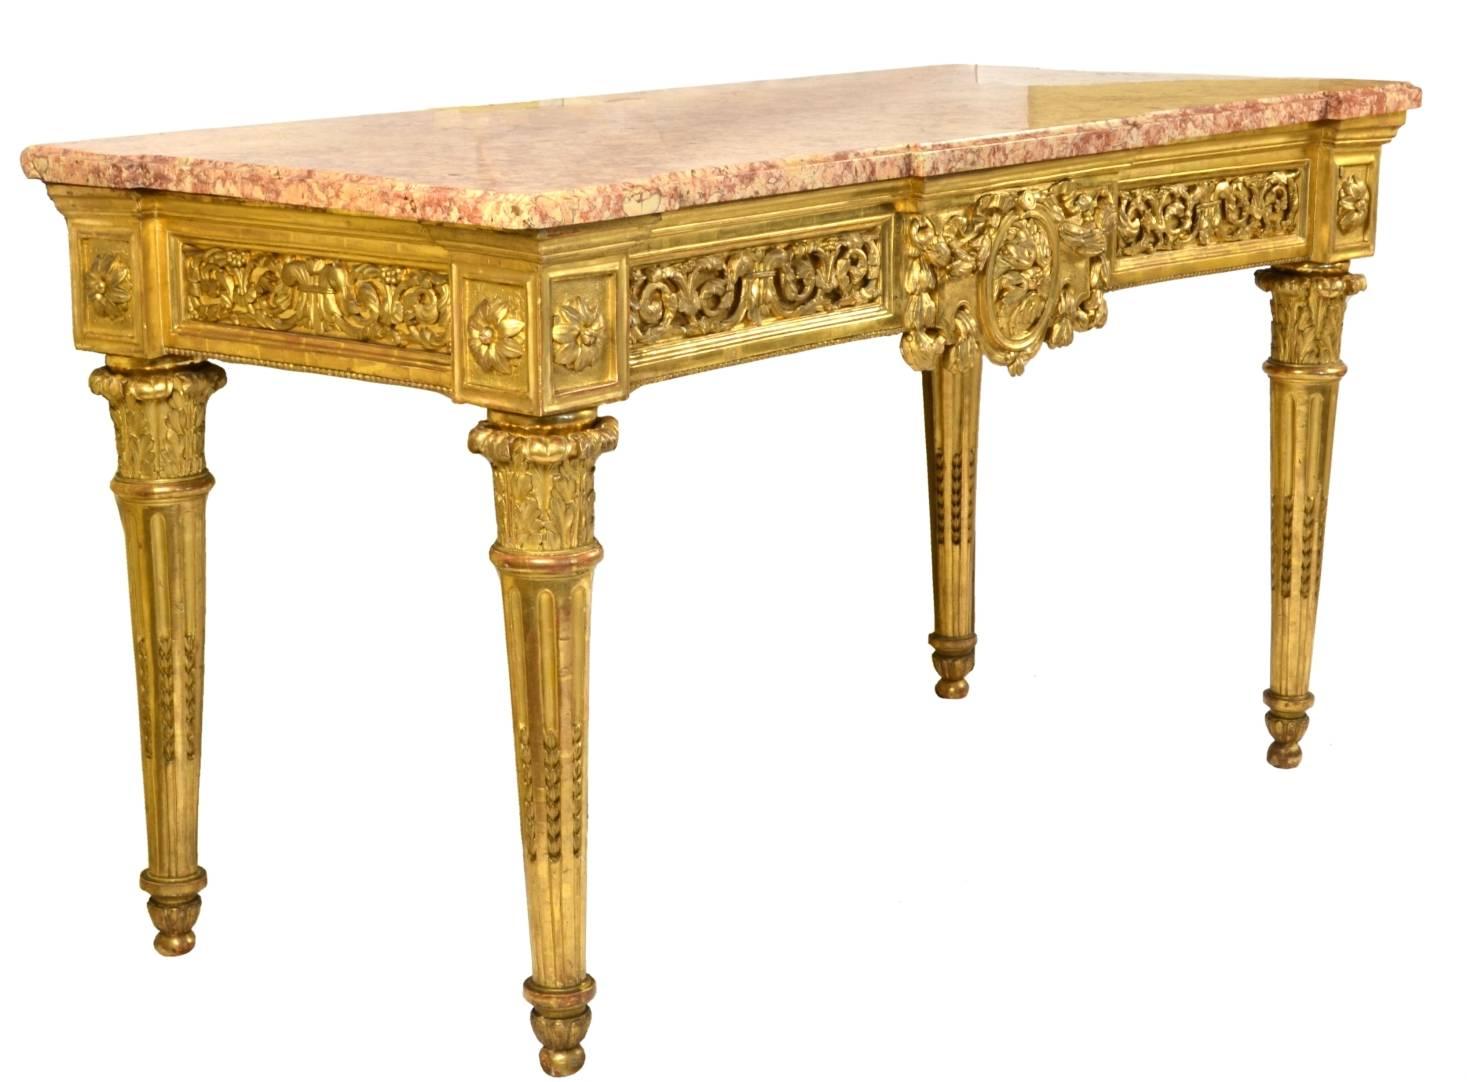 Italian Carved and Giltwood Neoclassical Console Table, circa 1790-1800 In Good Condition For Sale In St. Louis, MO